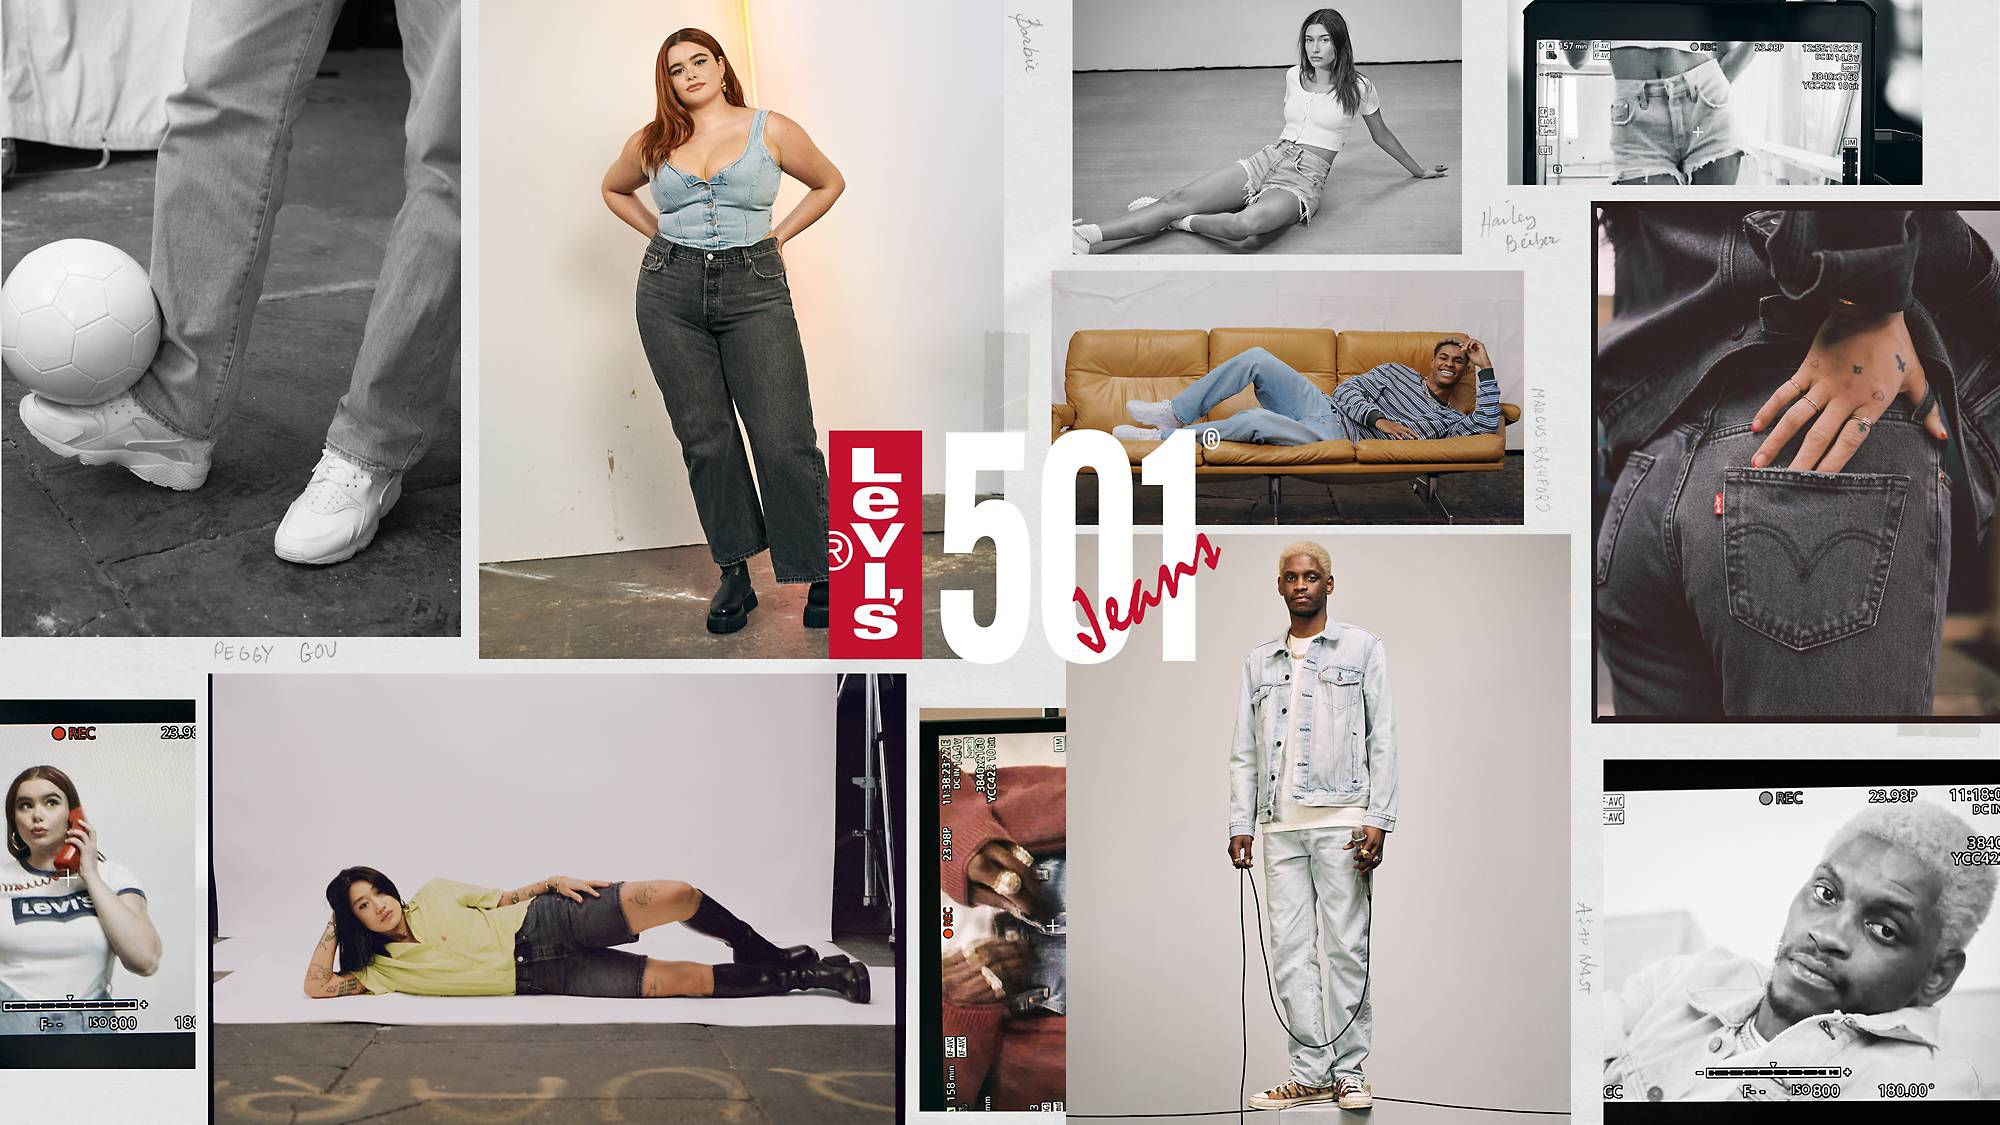 Levis 501 Jeans styled on four different influencers, Barbie Ferreira, Marcus Rashford, Peggy Gou and Asap Nast.